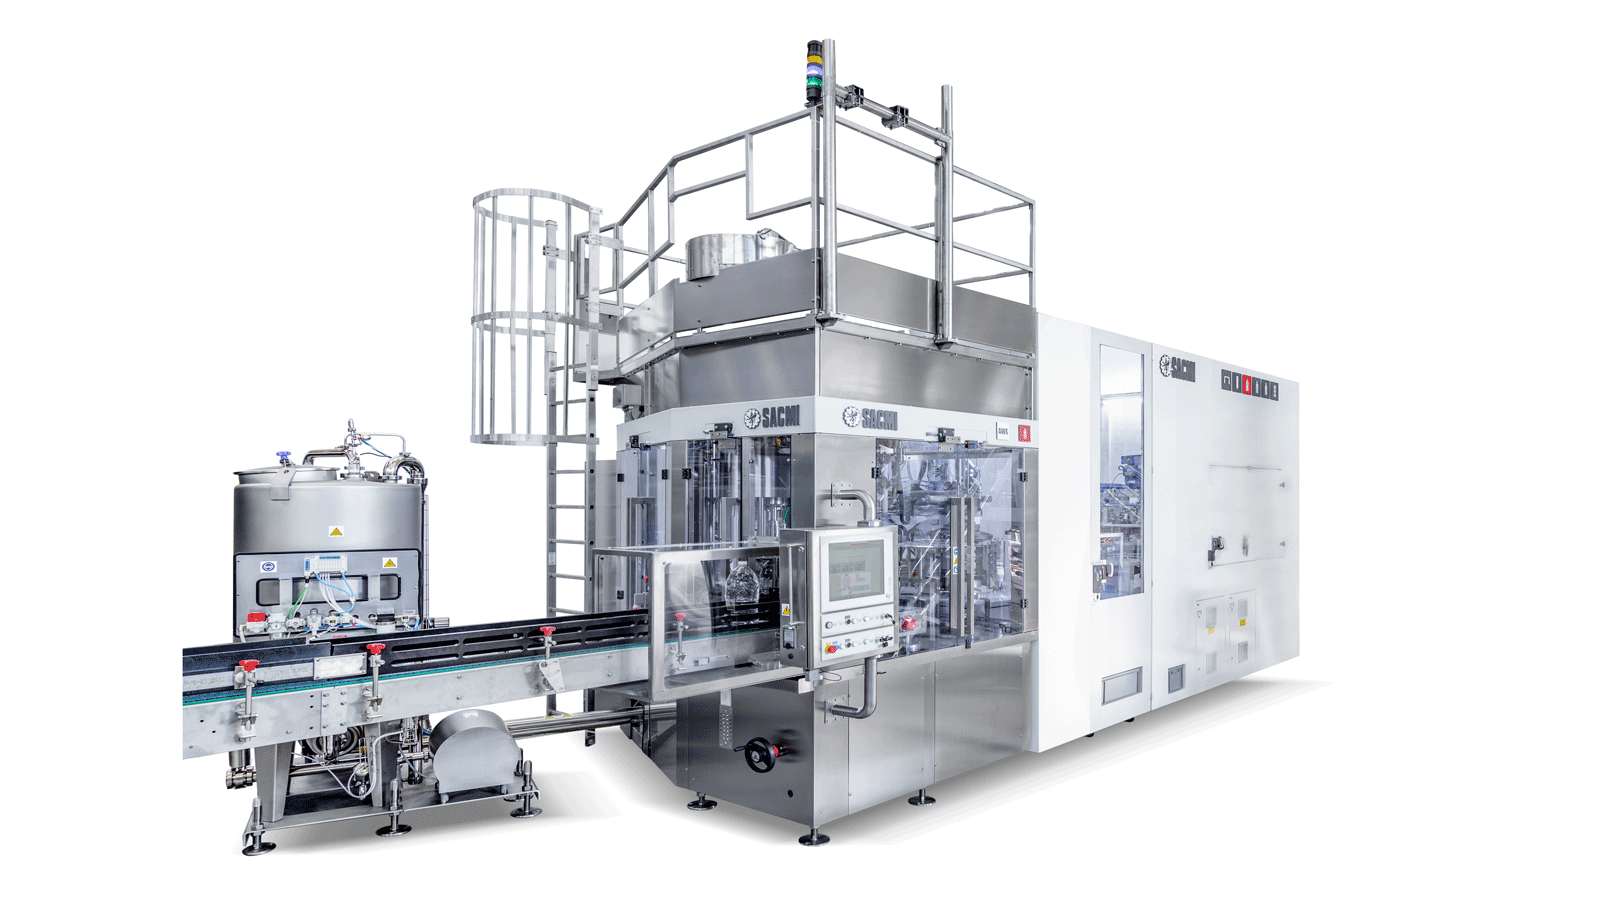 With the XL range, SACMI completes its array of PET bottle stretch-blow moulding and filling solutions